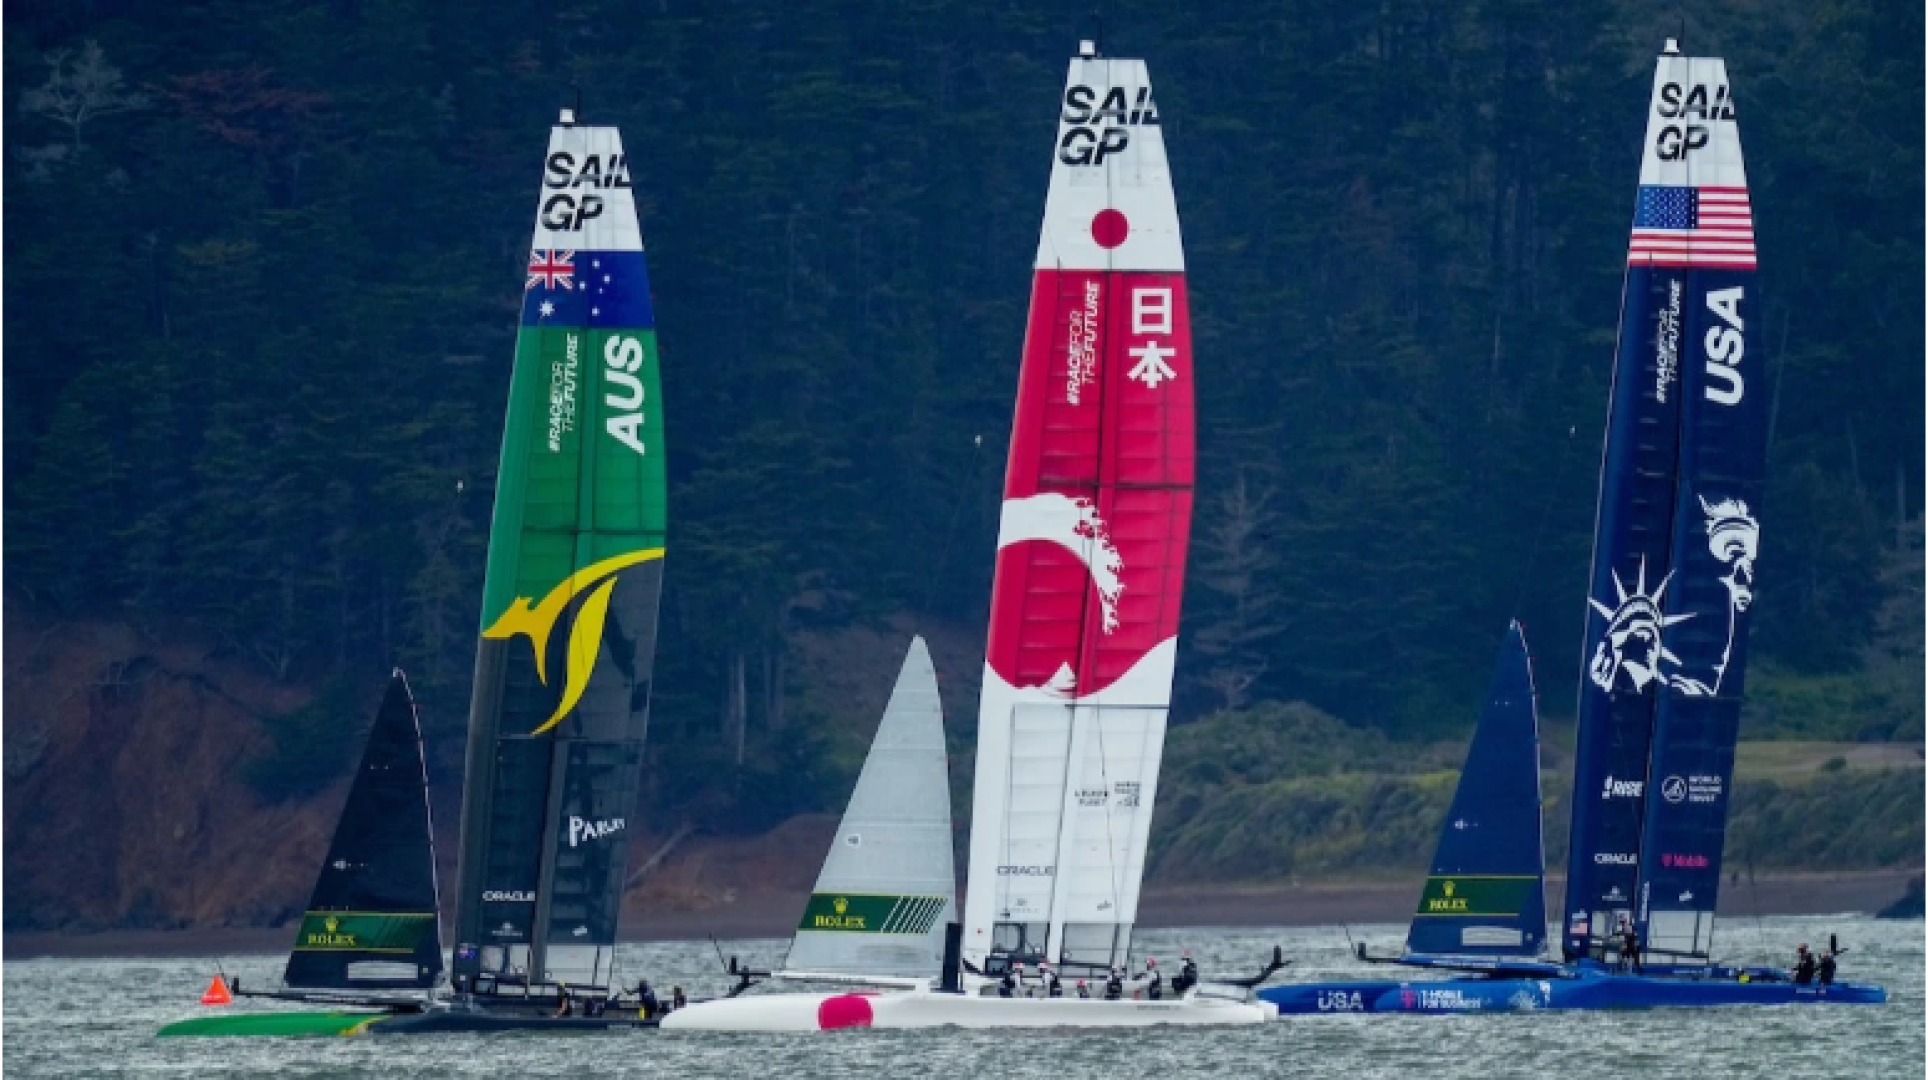 SailGP’s highly Season 3 is set to kick off in a matter of days